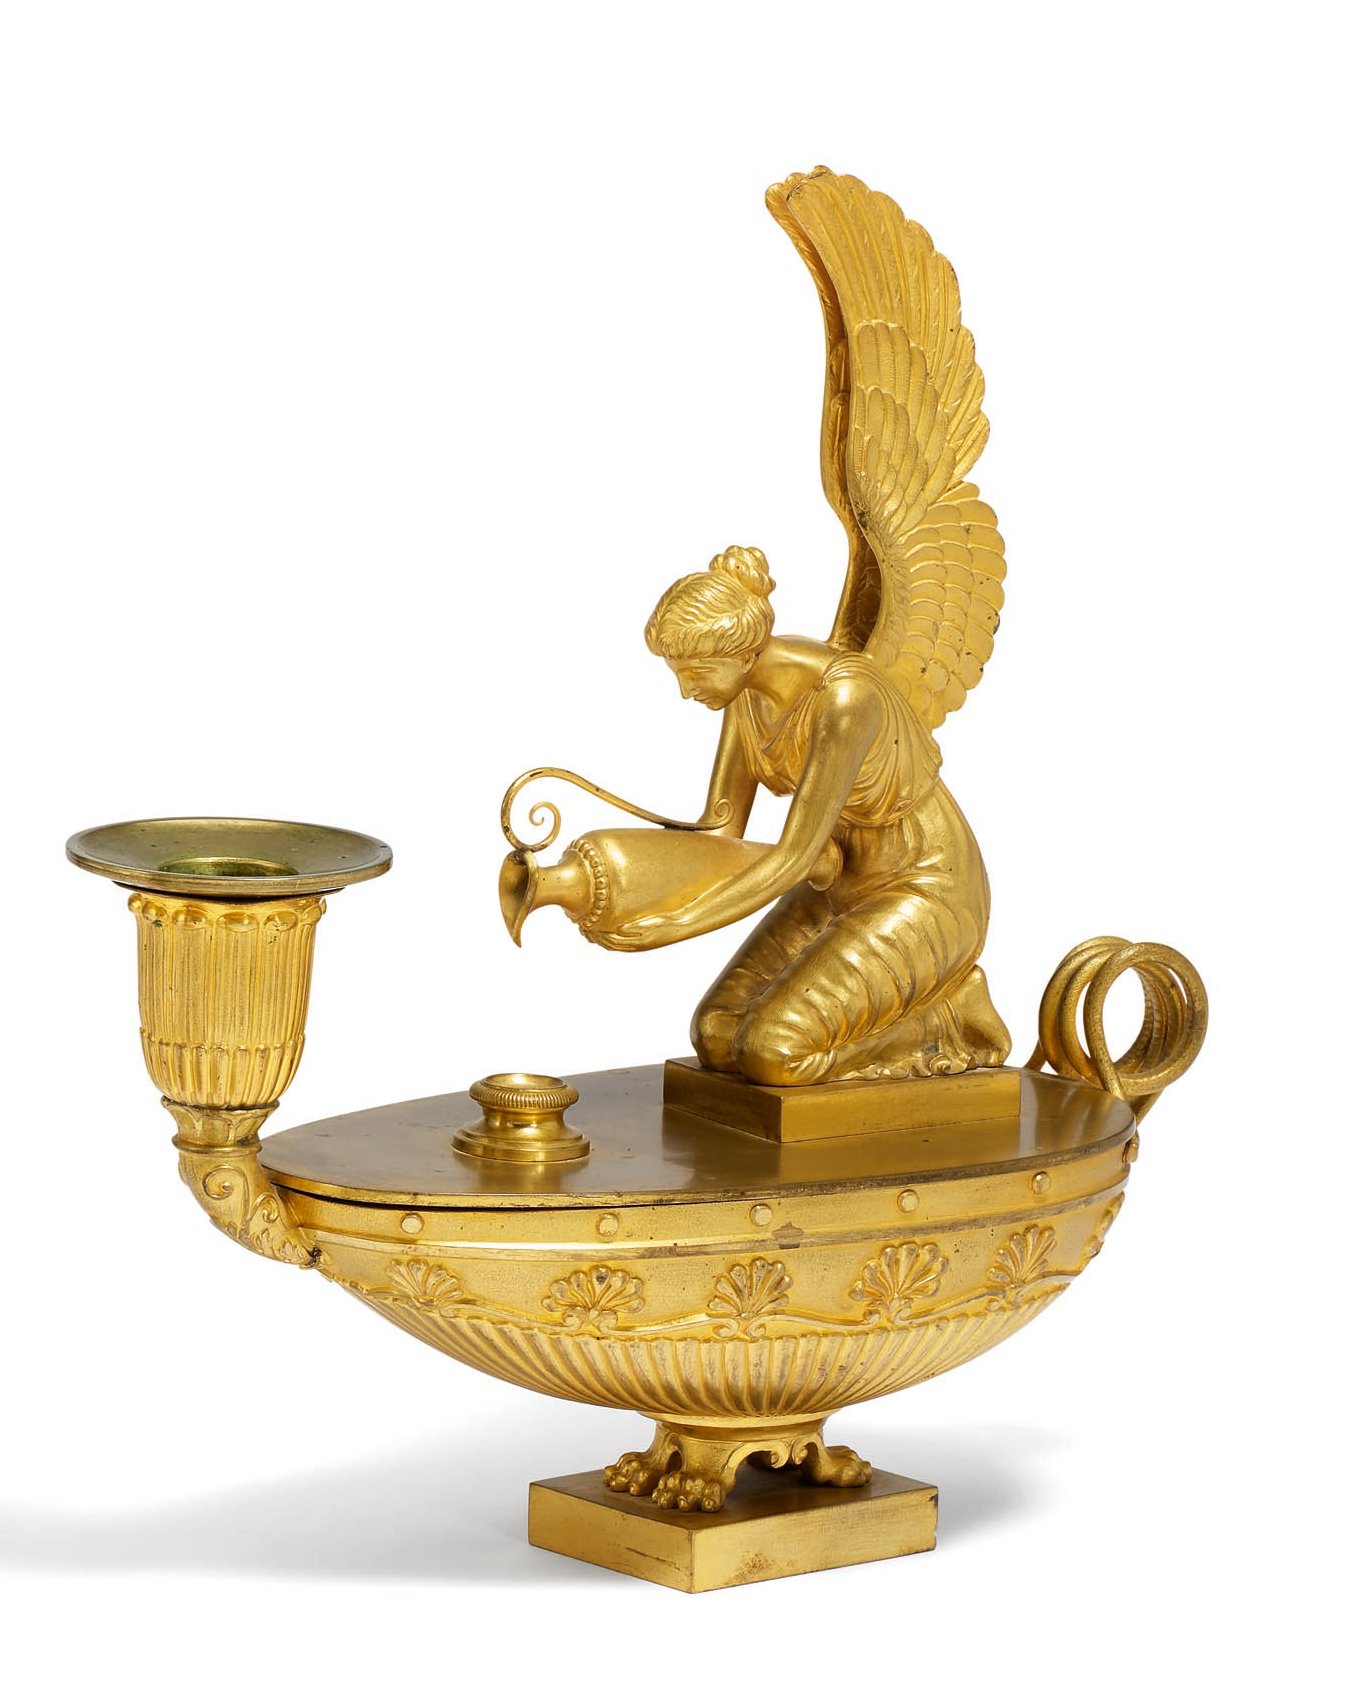 BRONZE CANDLESTICK IN THE FORM OF AN OIL LAMP EMPIRE